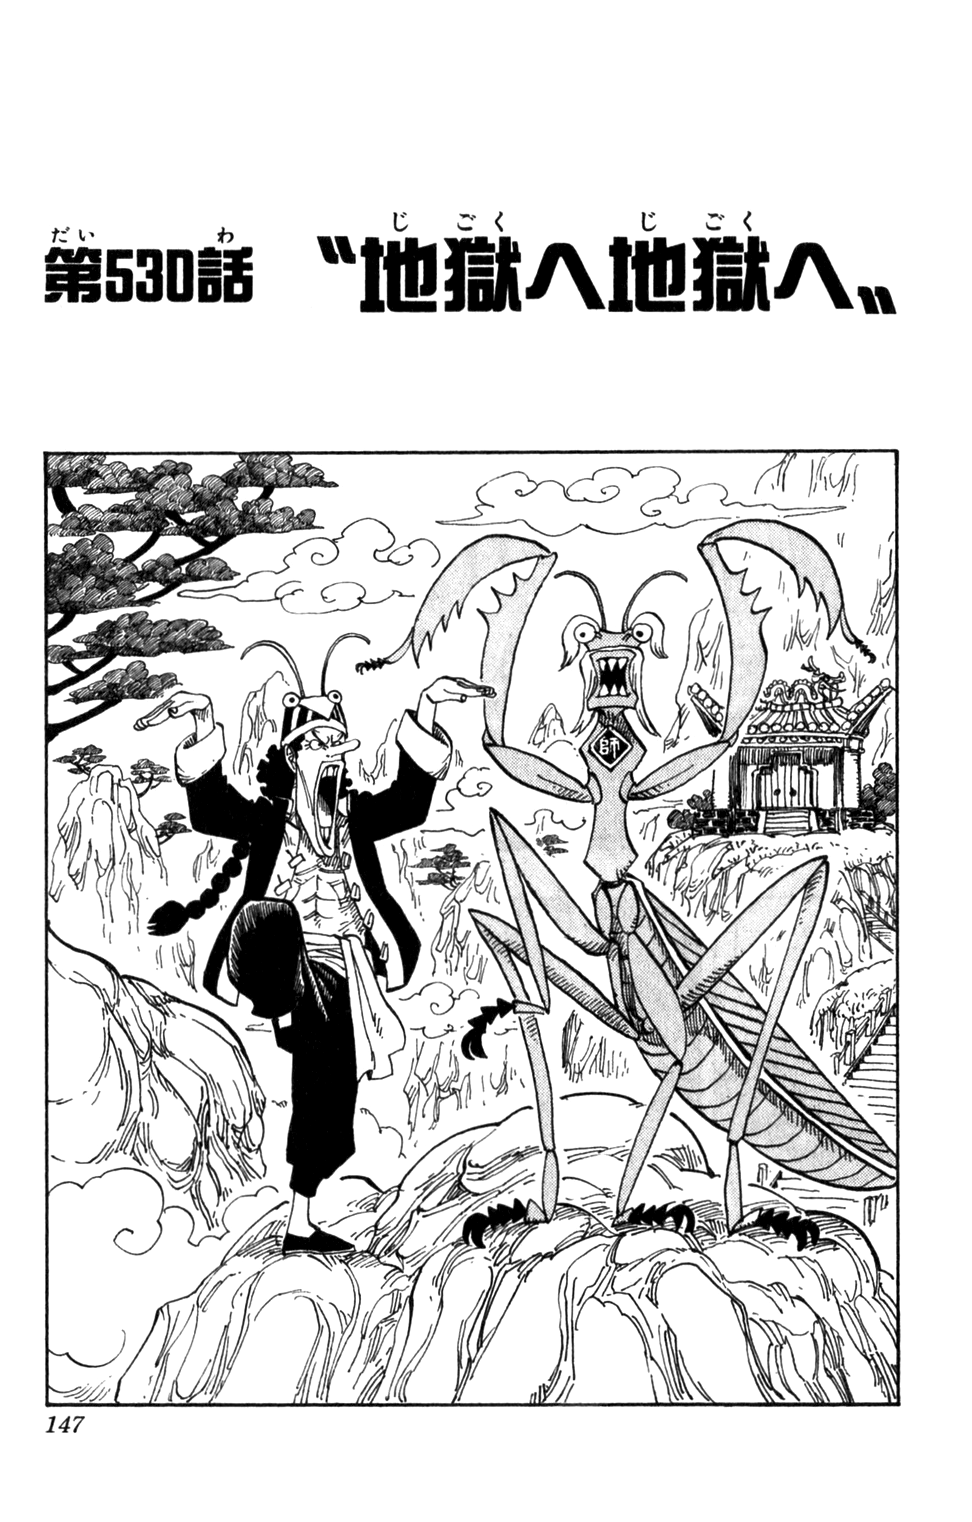 One Piece 1057: analisi del Capitolo - OnePiece.it